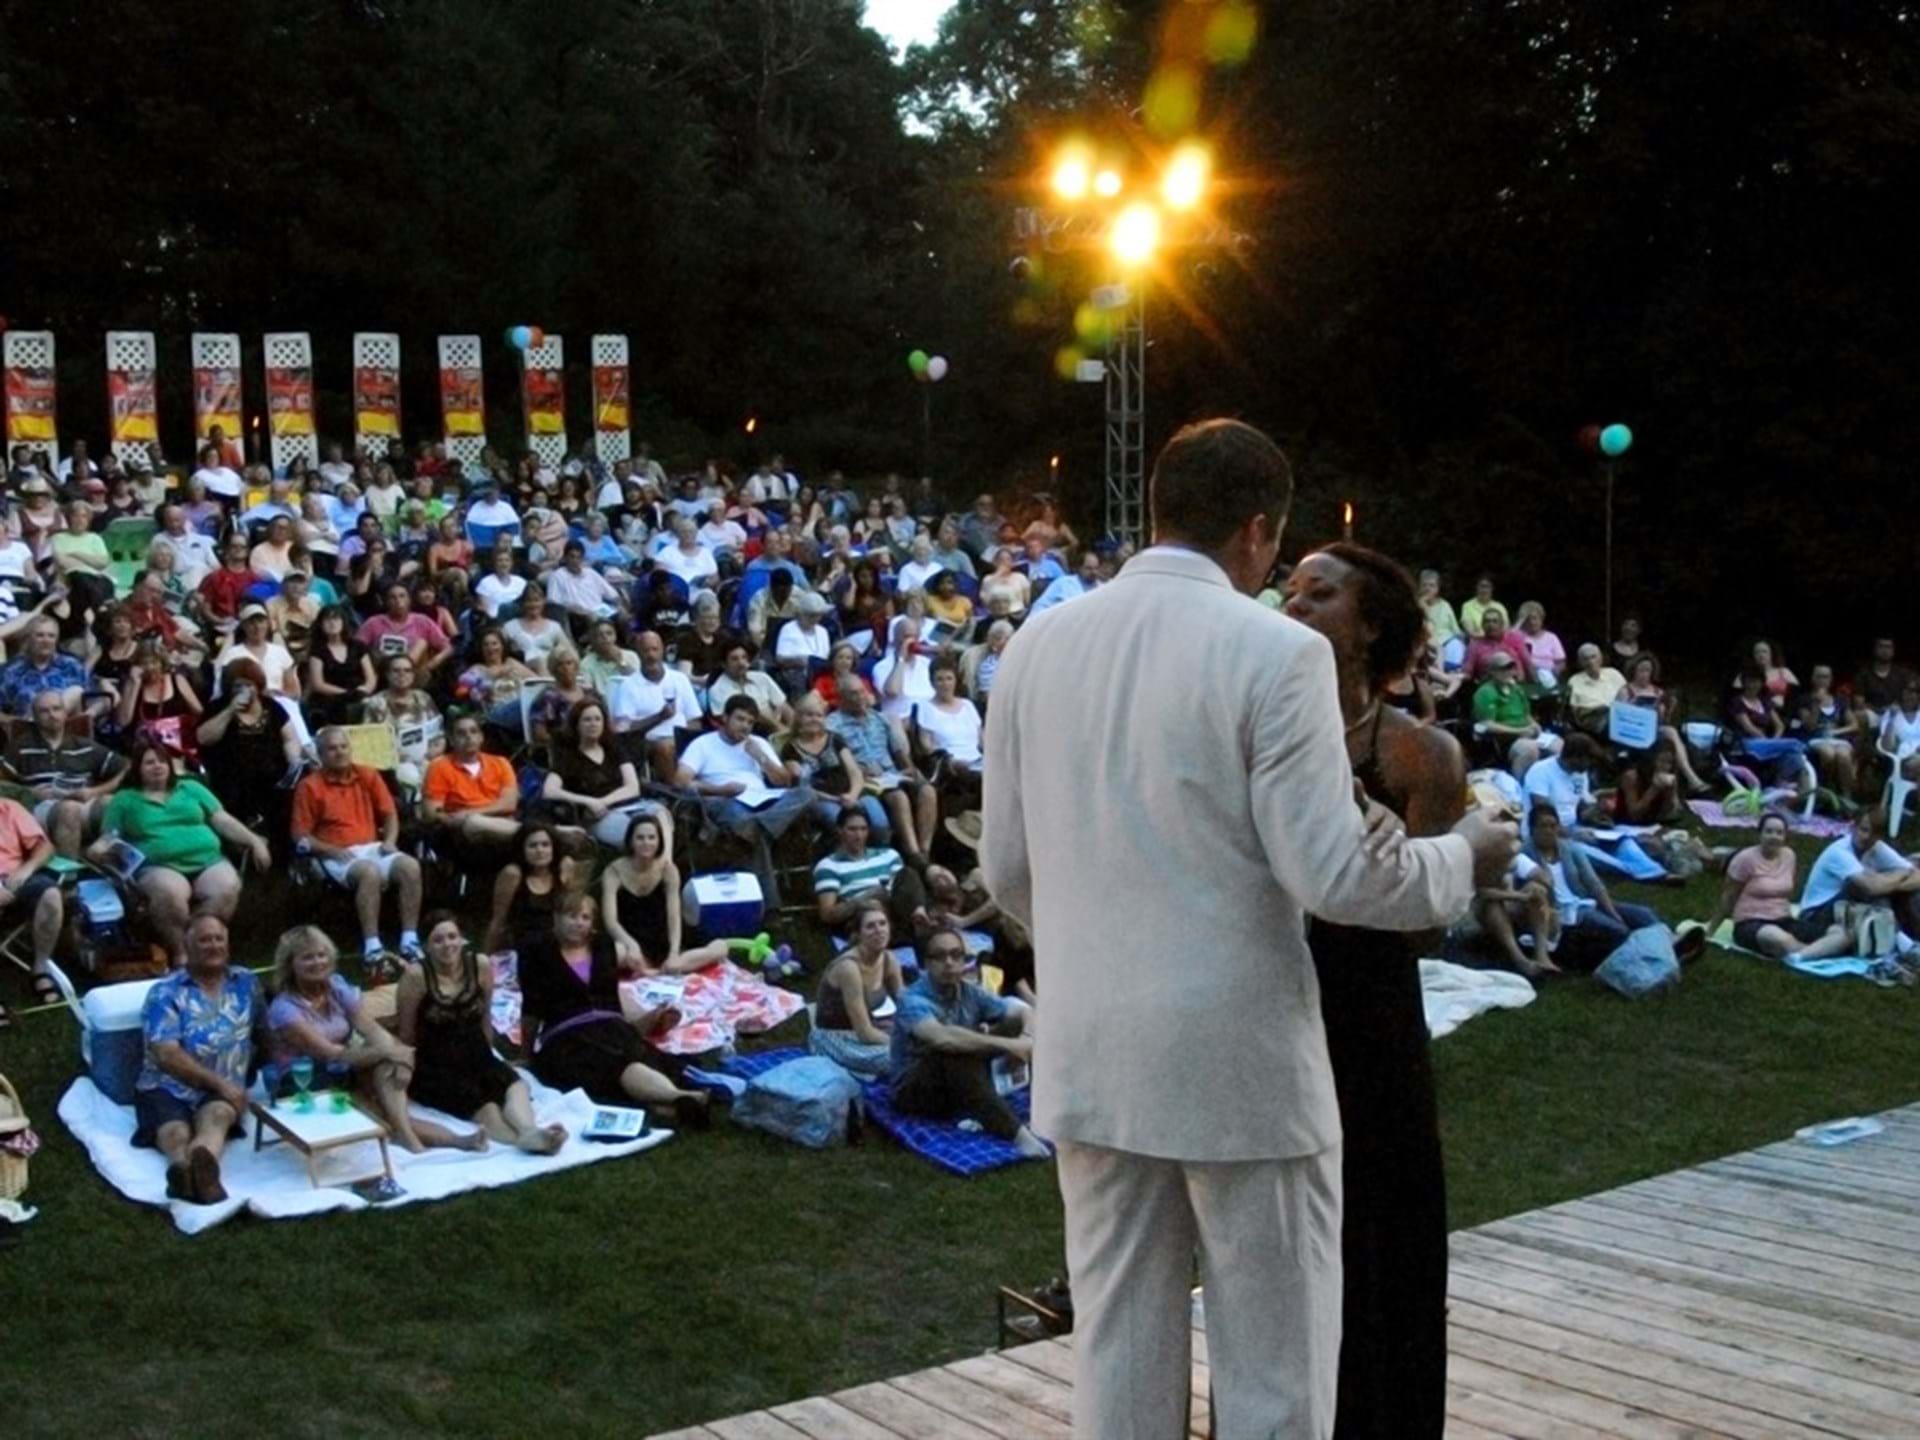 Classics at Brucemore, outdoor theater